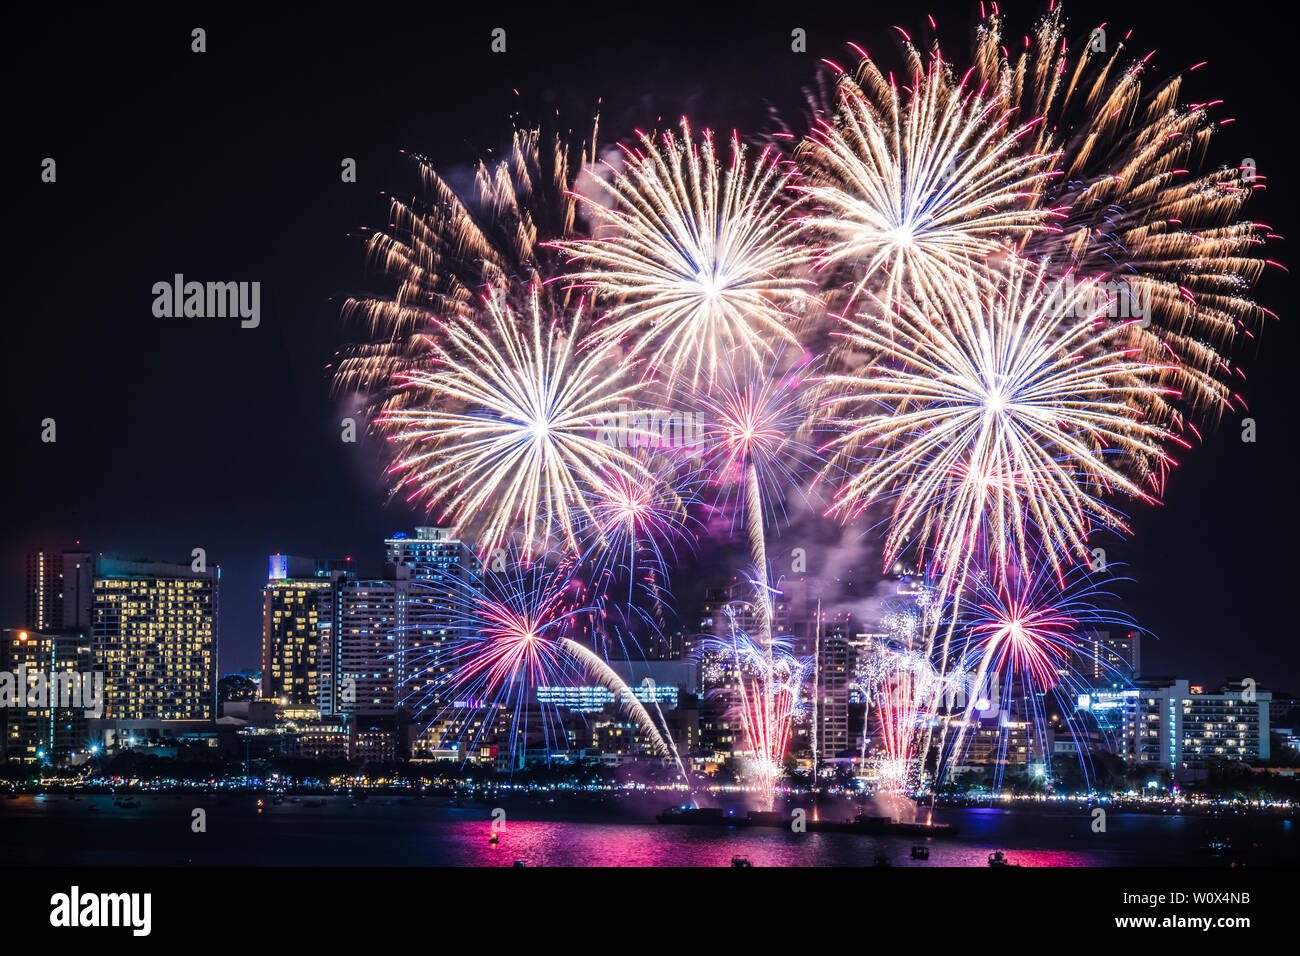 real fireworks festival in the sky for celebration at night with city view at background and boat floating on the sea at foreground at coast side Stock Photo